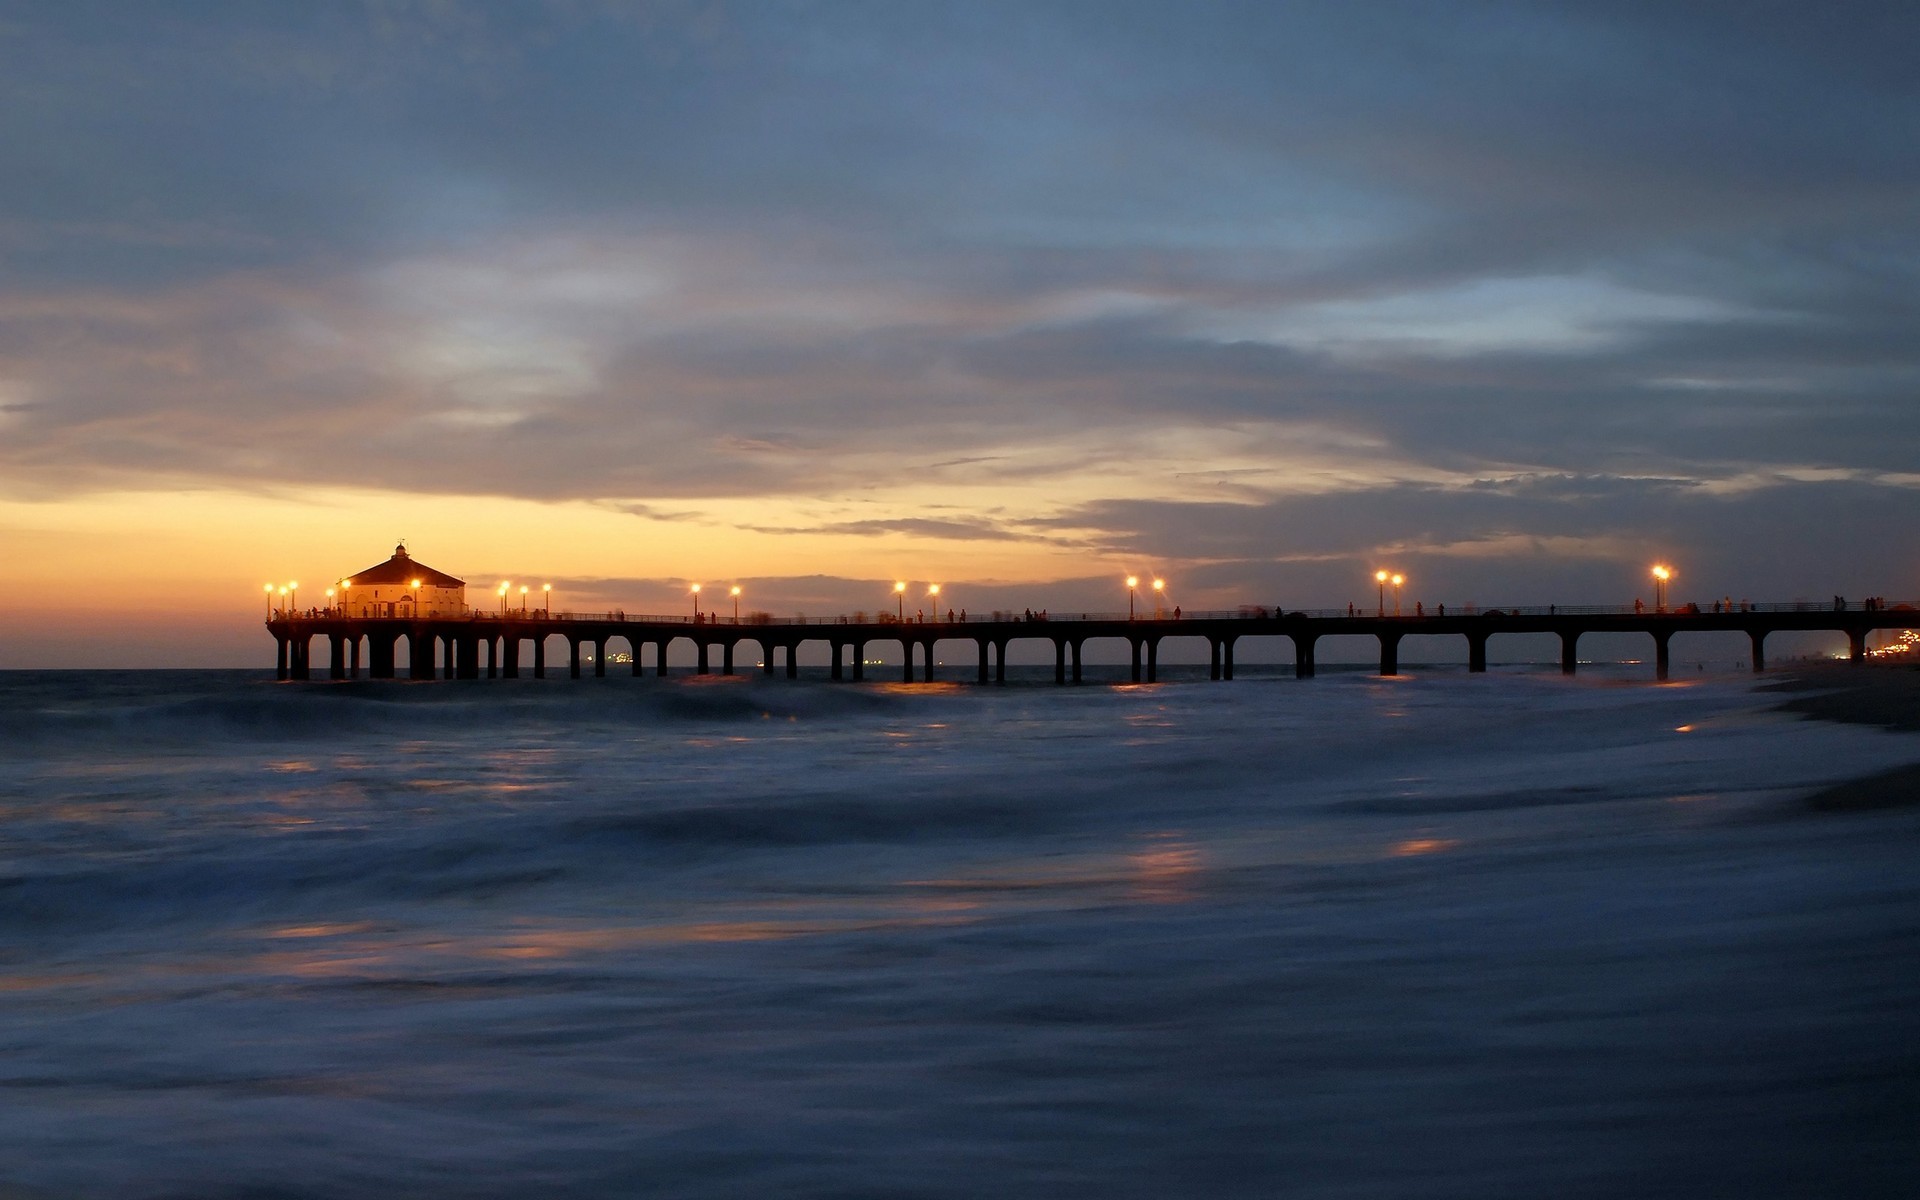 Sunset skyline with pier and beach in the light